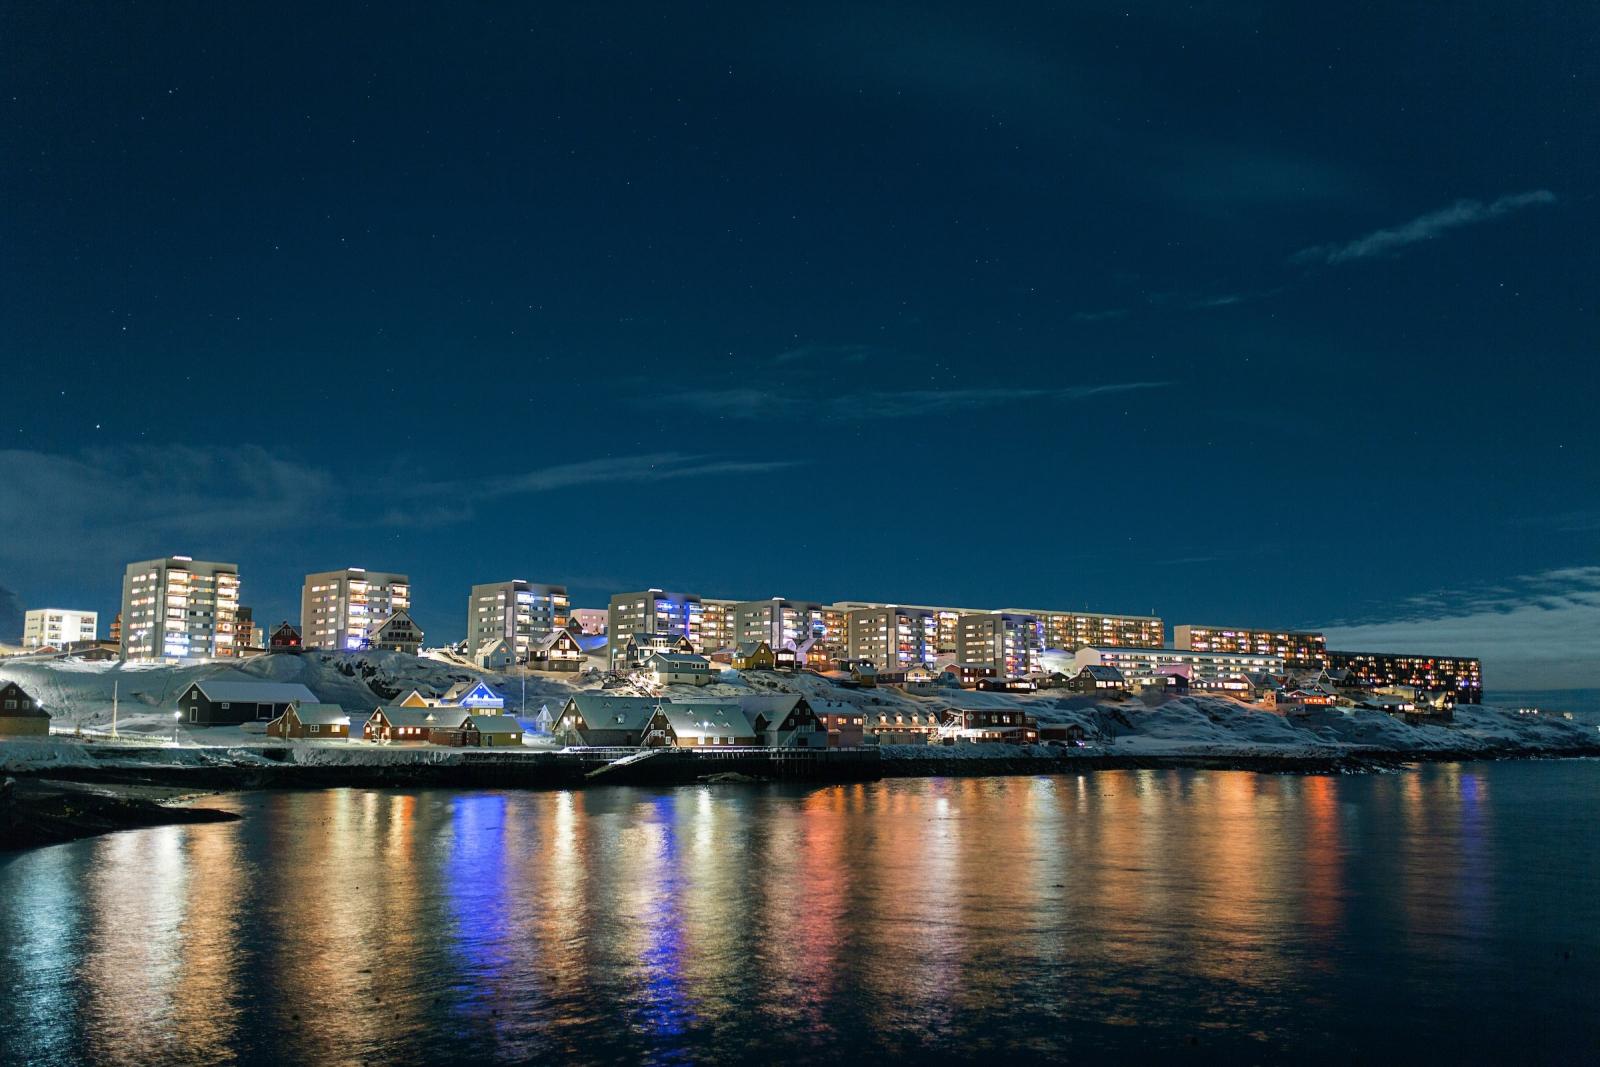 Night over colonial harbour, Nuuk. Photo - Rebecca Gustafsson, Visit Greenland